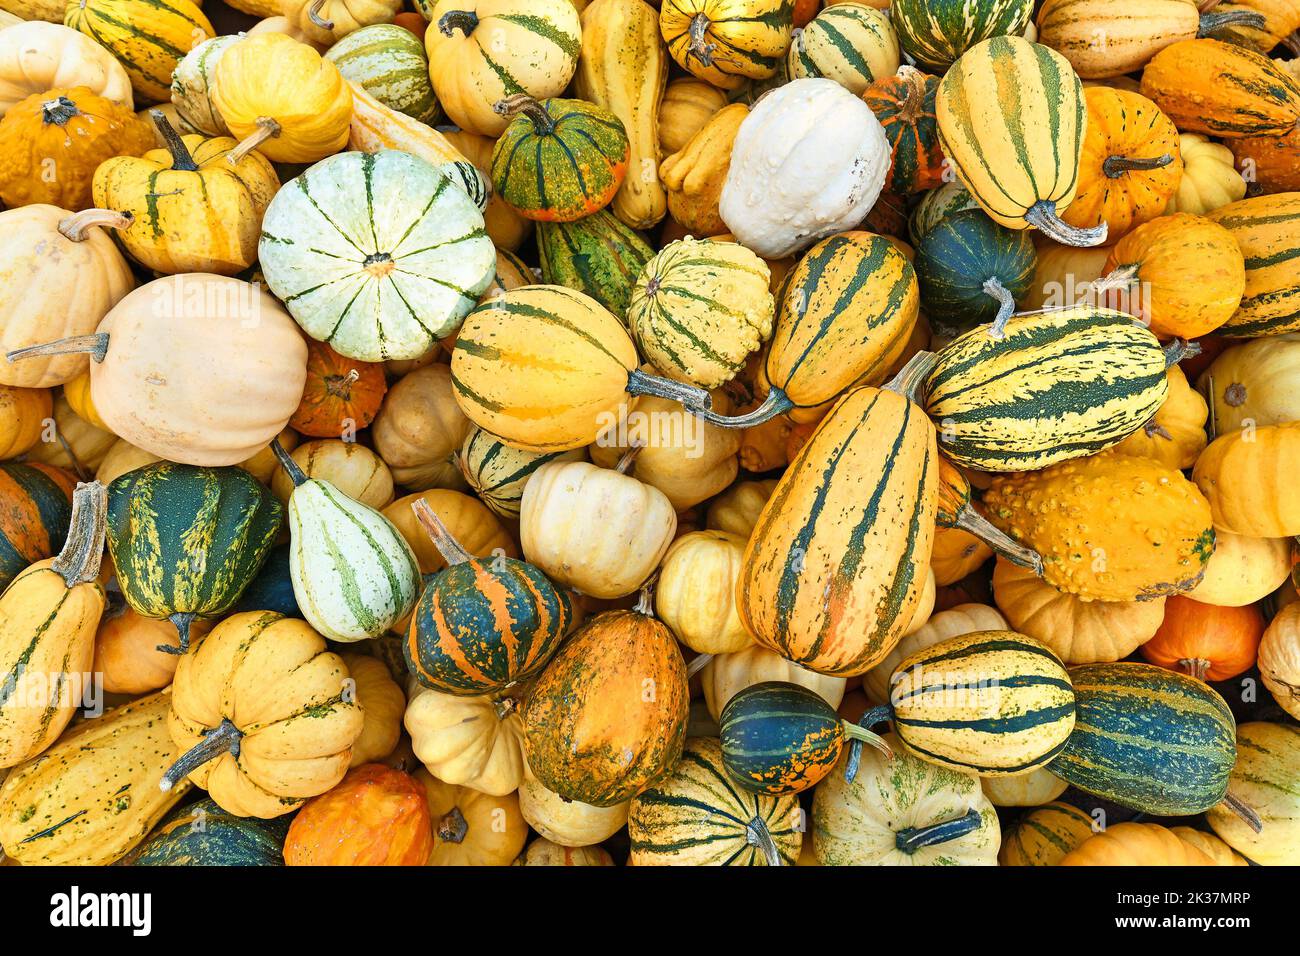 Top view of m different ornamental gourds and pumpkins Stock Photo